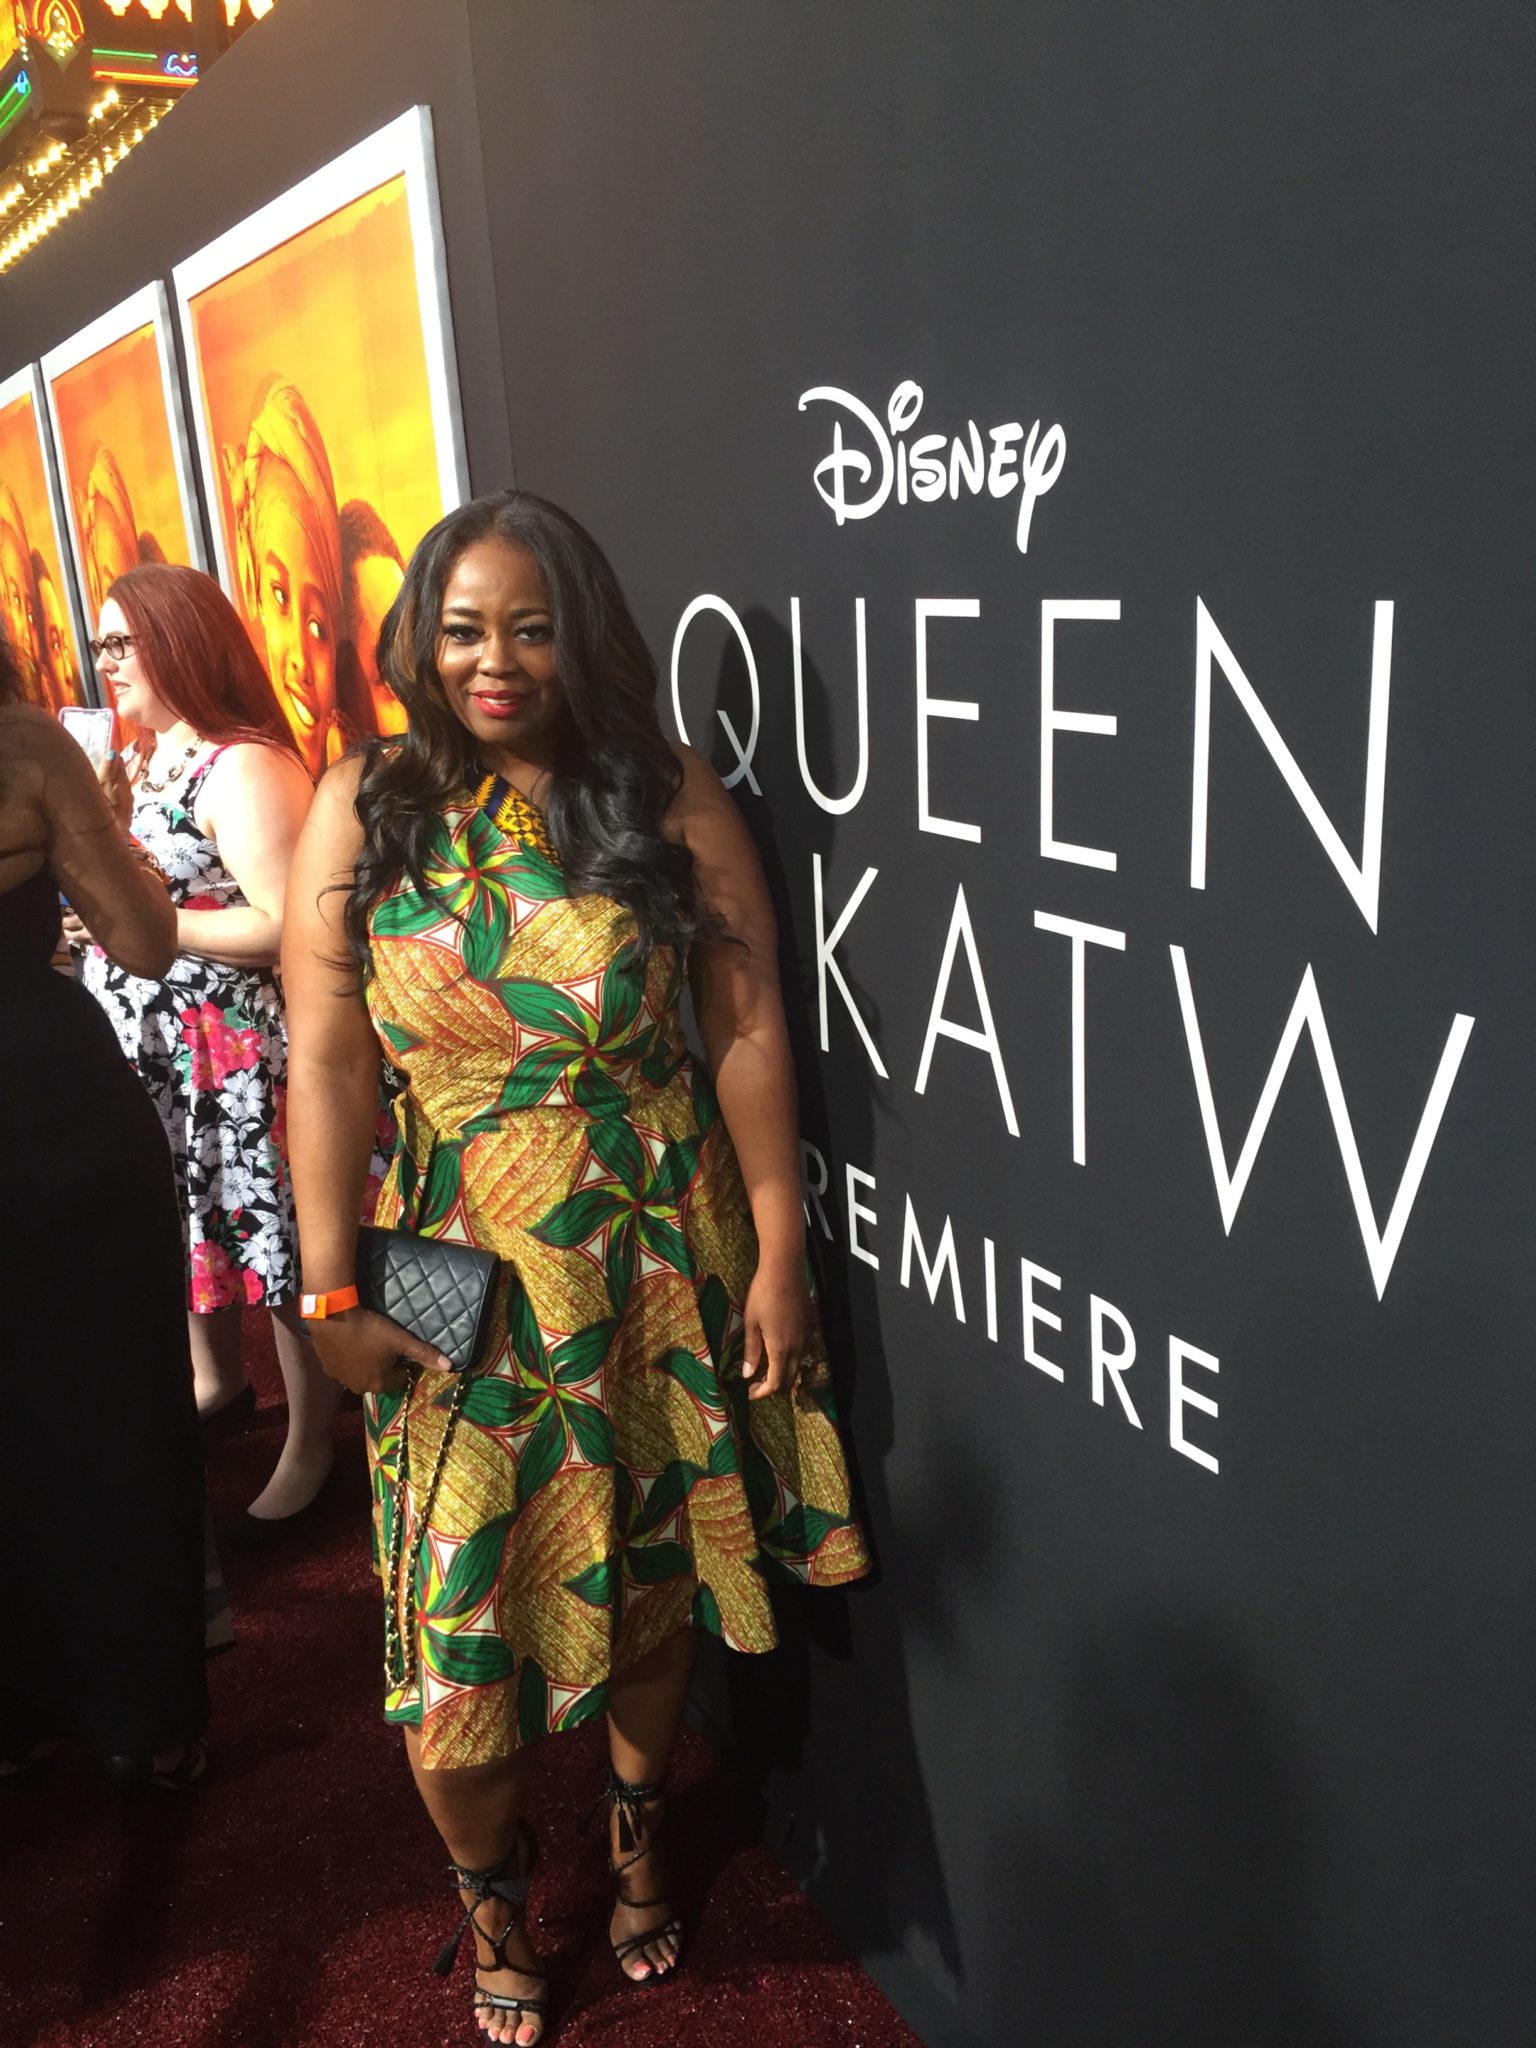 My Red Carpet Experience At Disney’s ‘Queen Of Katwe’ Hollywood Premiere